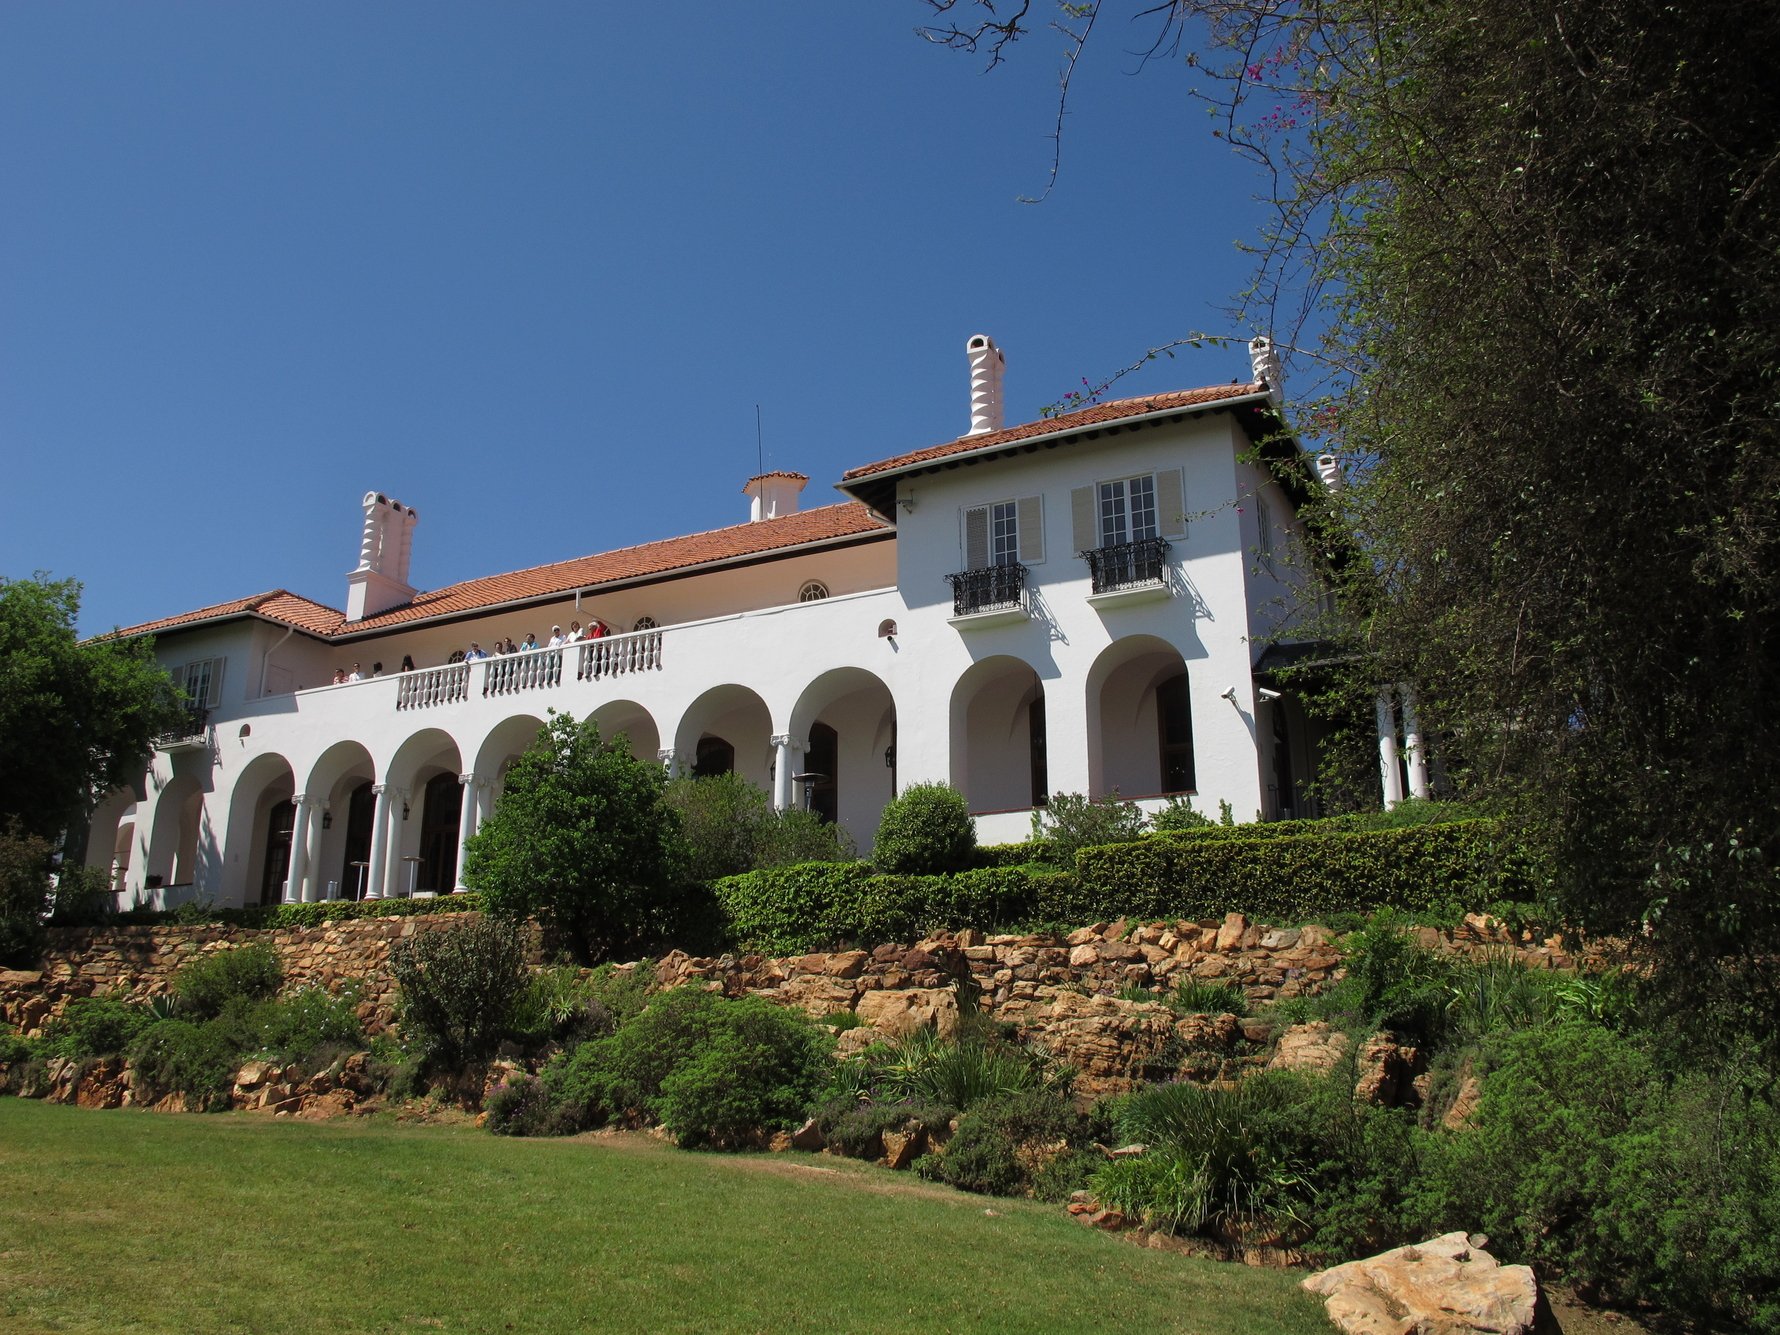 Villa Arcadia's columns are typical of Herbert Bakers design style. The historic building is now home to Hollard's contemporary art collection. Photo: Wikipedia/Adam H. Golding.